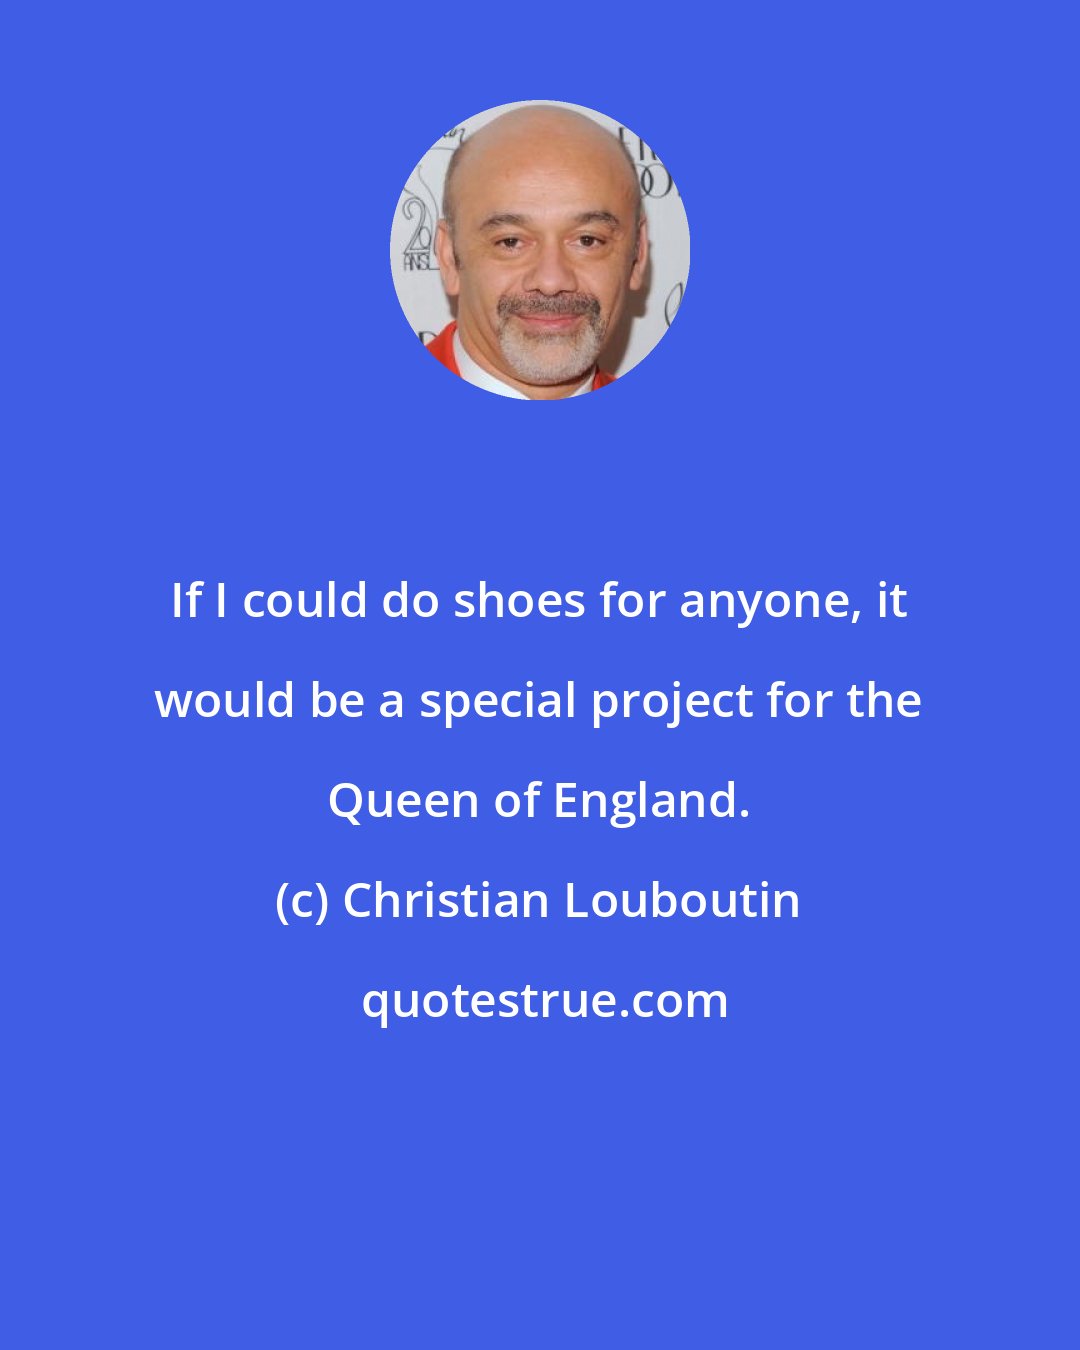 Christian Louboutin: If I could do shoes for anyone, it would be a special project for the Queen of England.